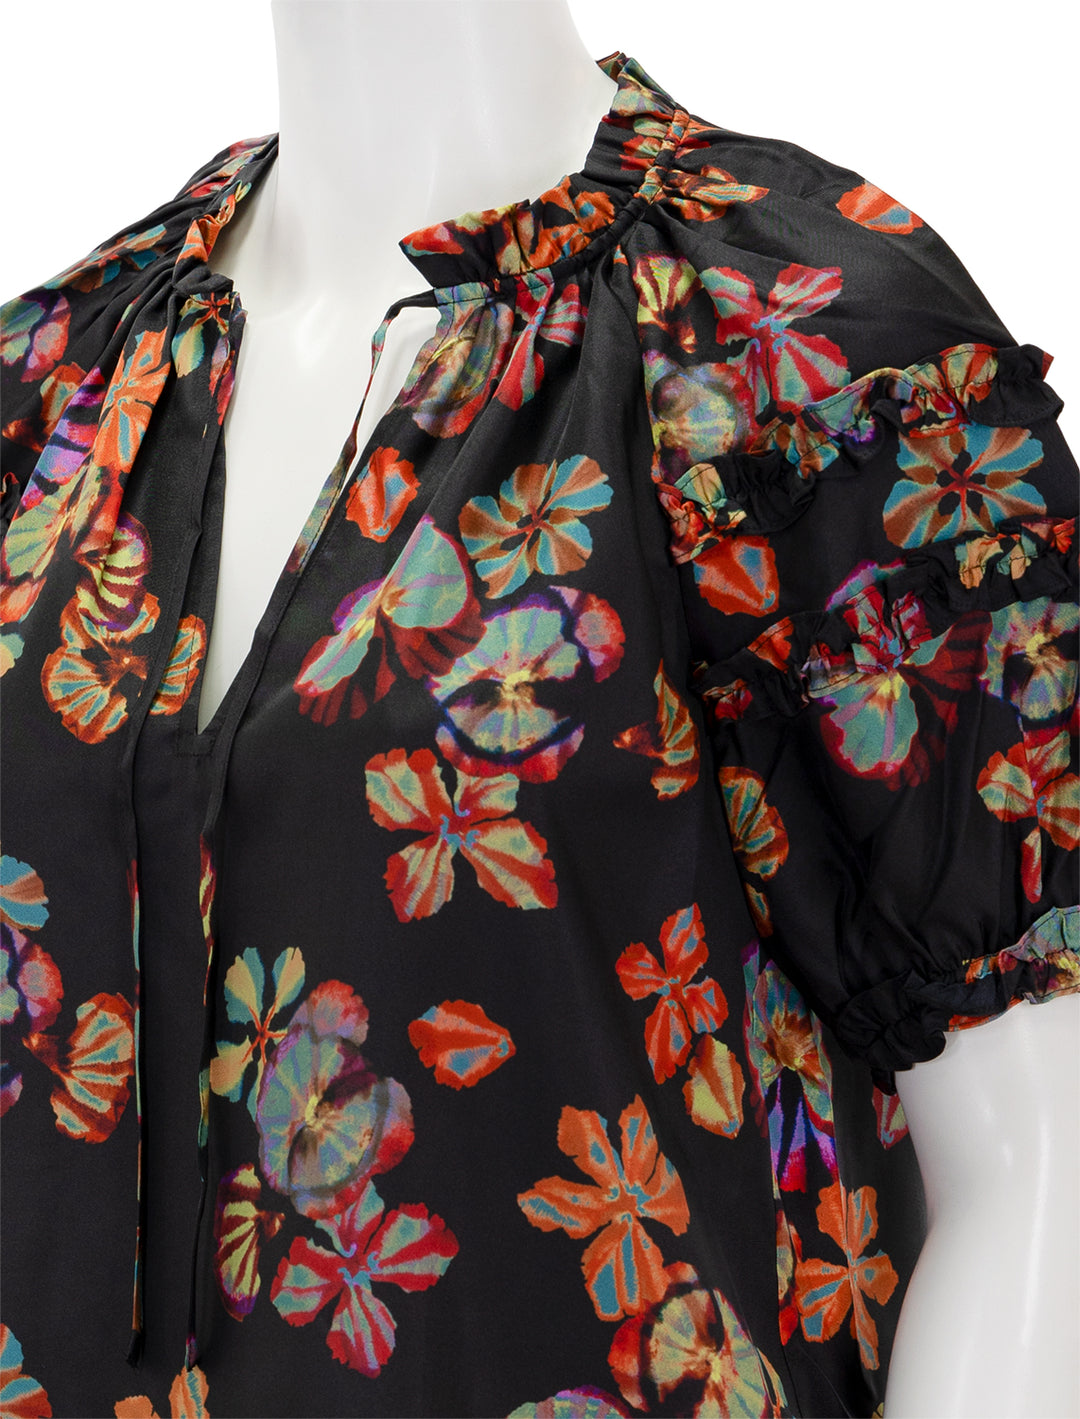 Close-up view of Ulla Johnson's annabella top in pansy print.